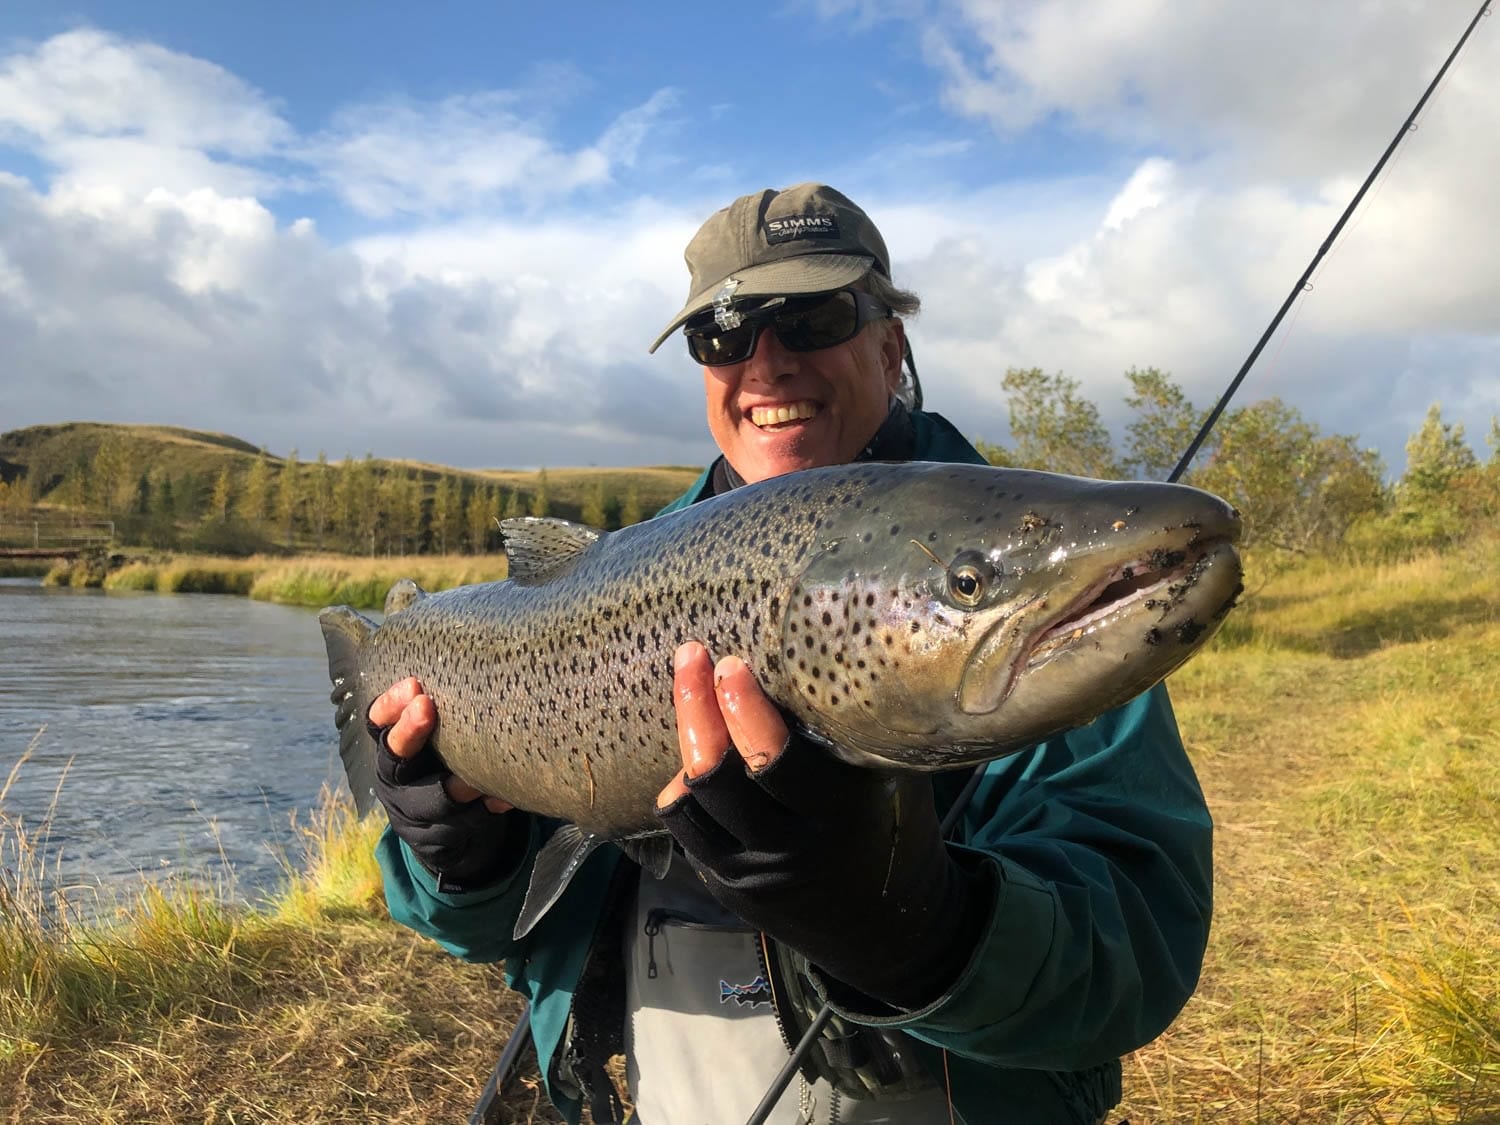 The thrill of the catch: landing a sea trout on the Tungulækur River